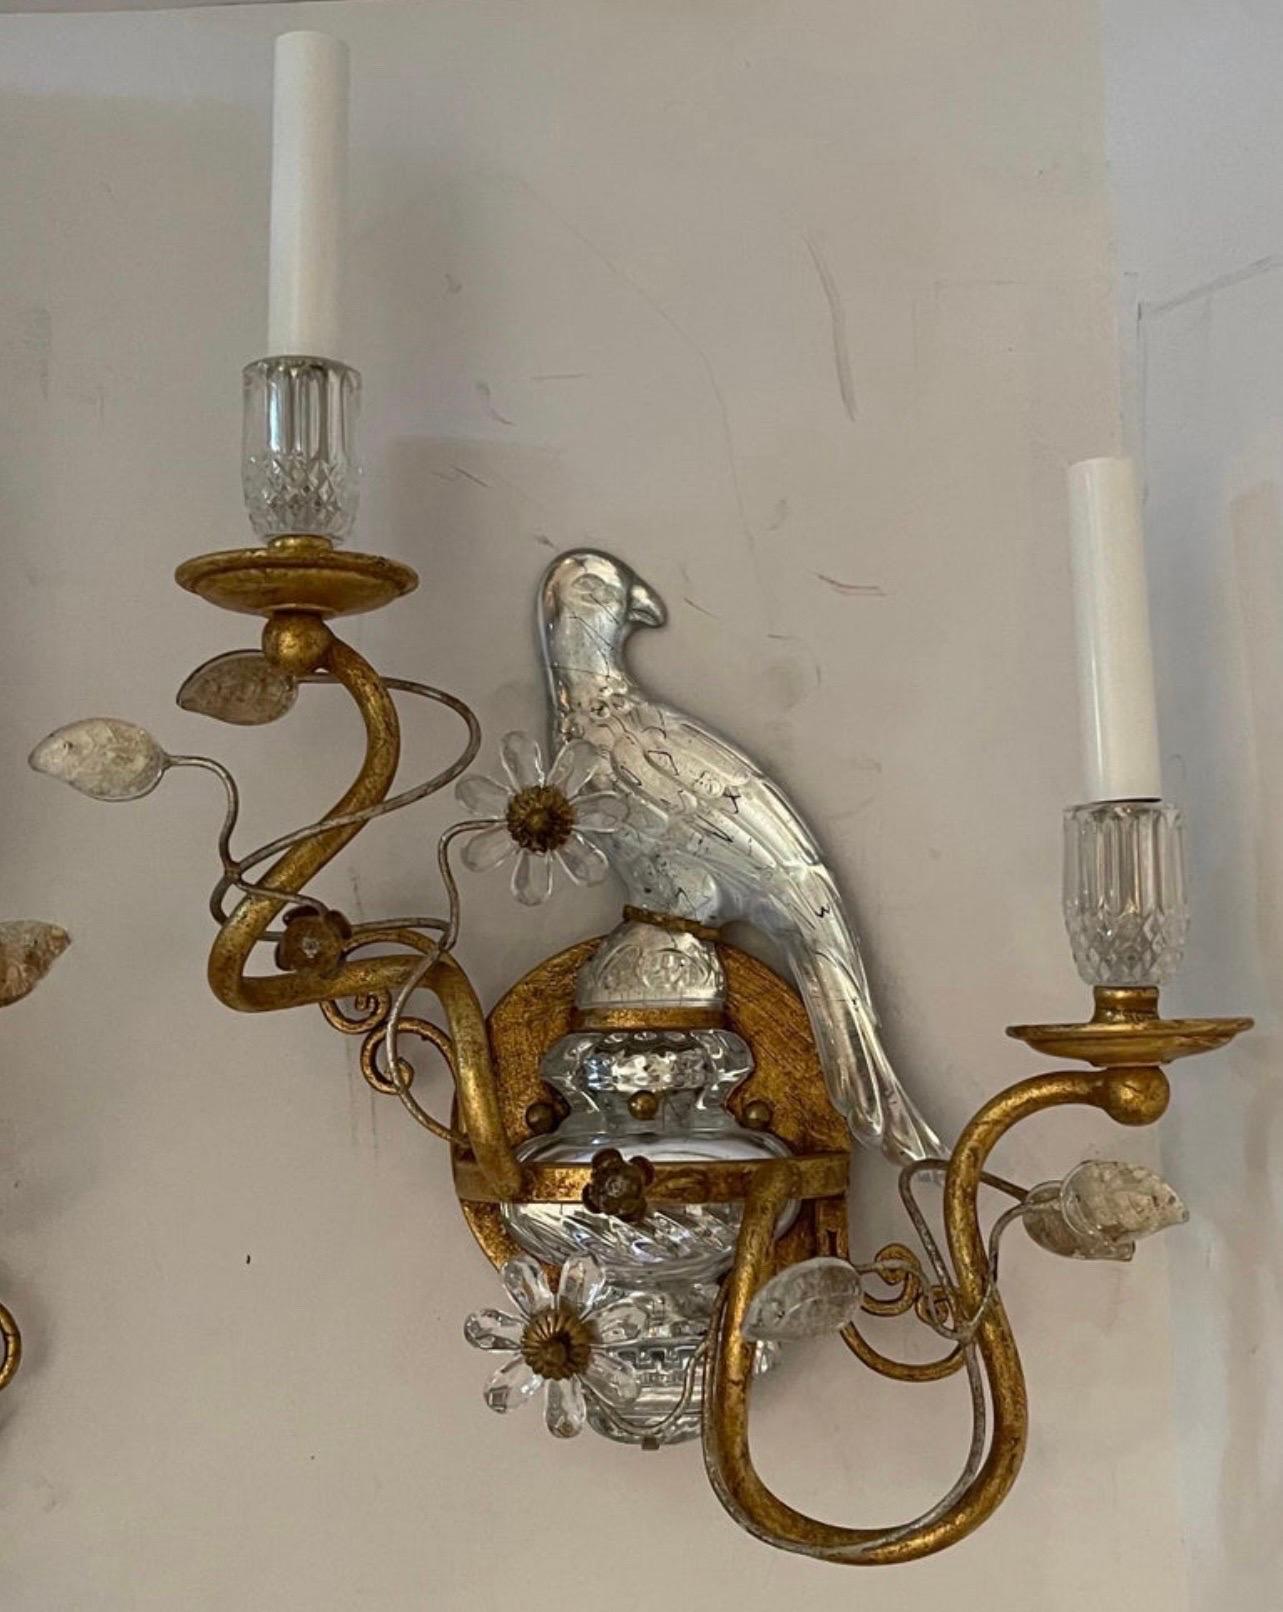 A wonderful pair of faux rock crystal / glass birds sitting on top of an urn form base, with a beautiful gold gilt patina these sconces come ready to install with all mounting hardware. They are in the manner of Maison Bagues & Sherle Wagner.